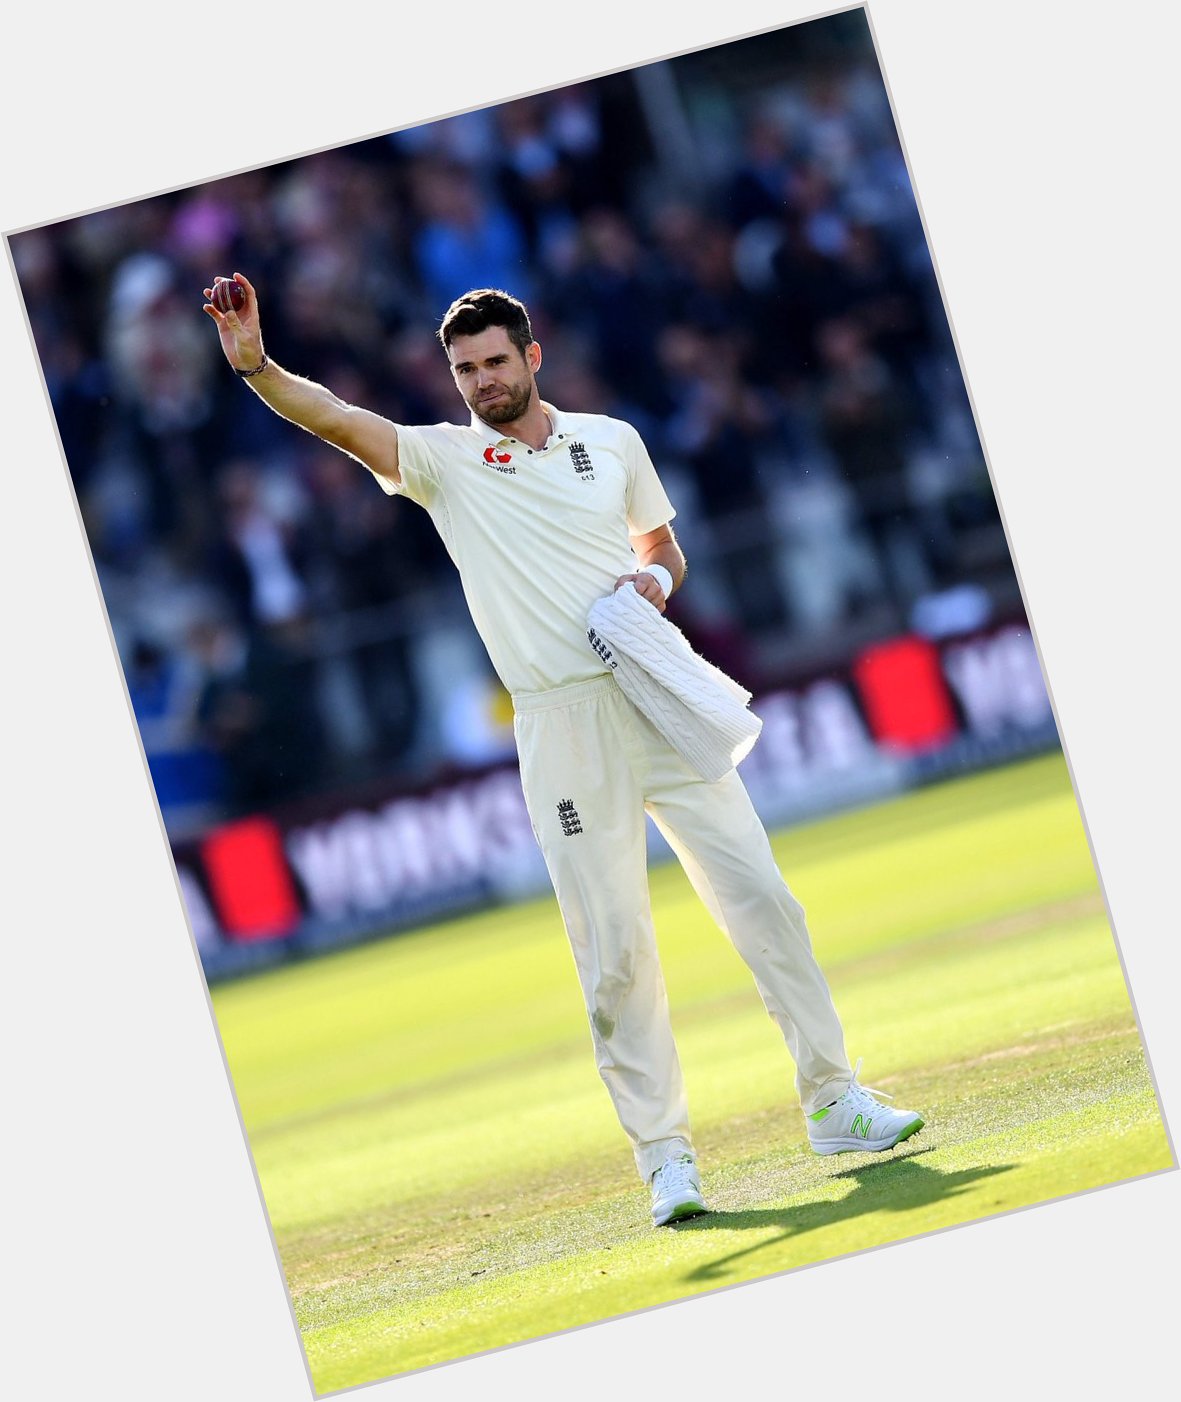  Wish you a very HAPPY BIRTHDAY to jimmy(james)Anderson....  